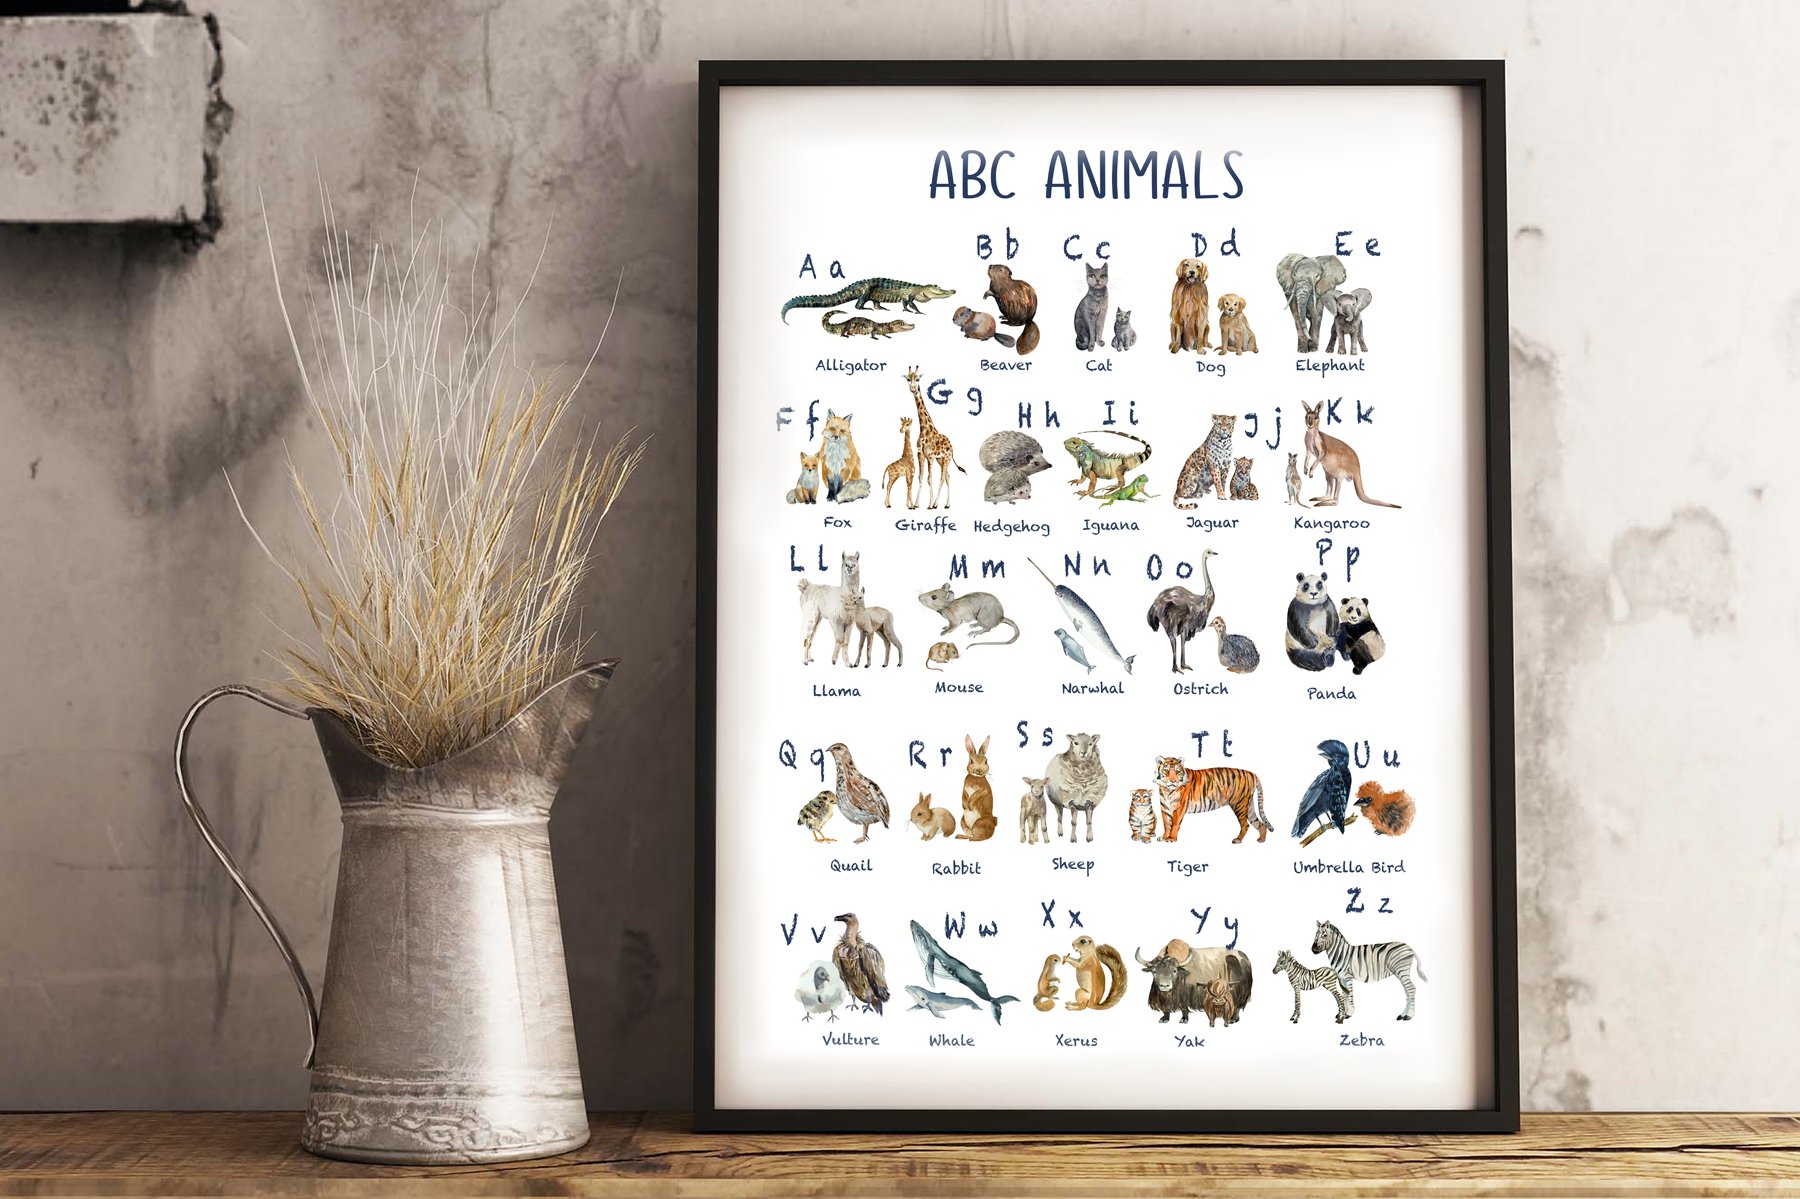 Watercolor Abc Animals Posters cover image.